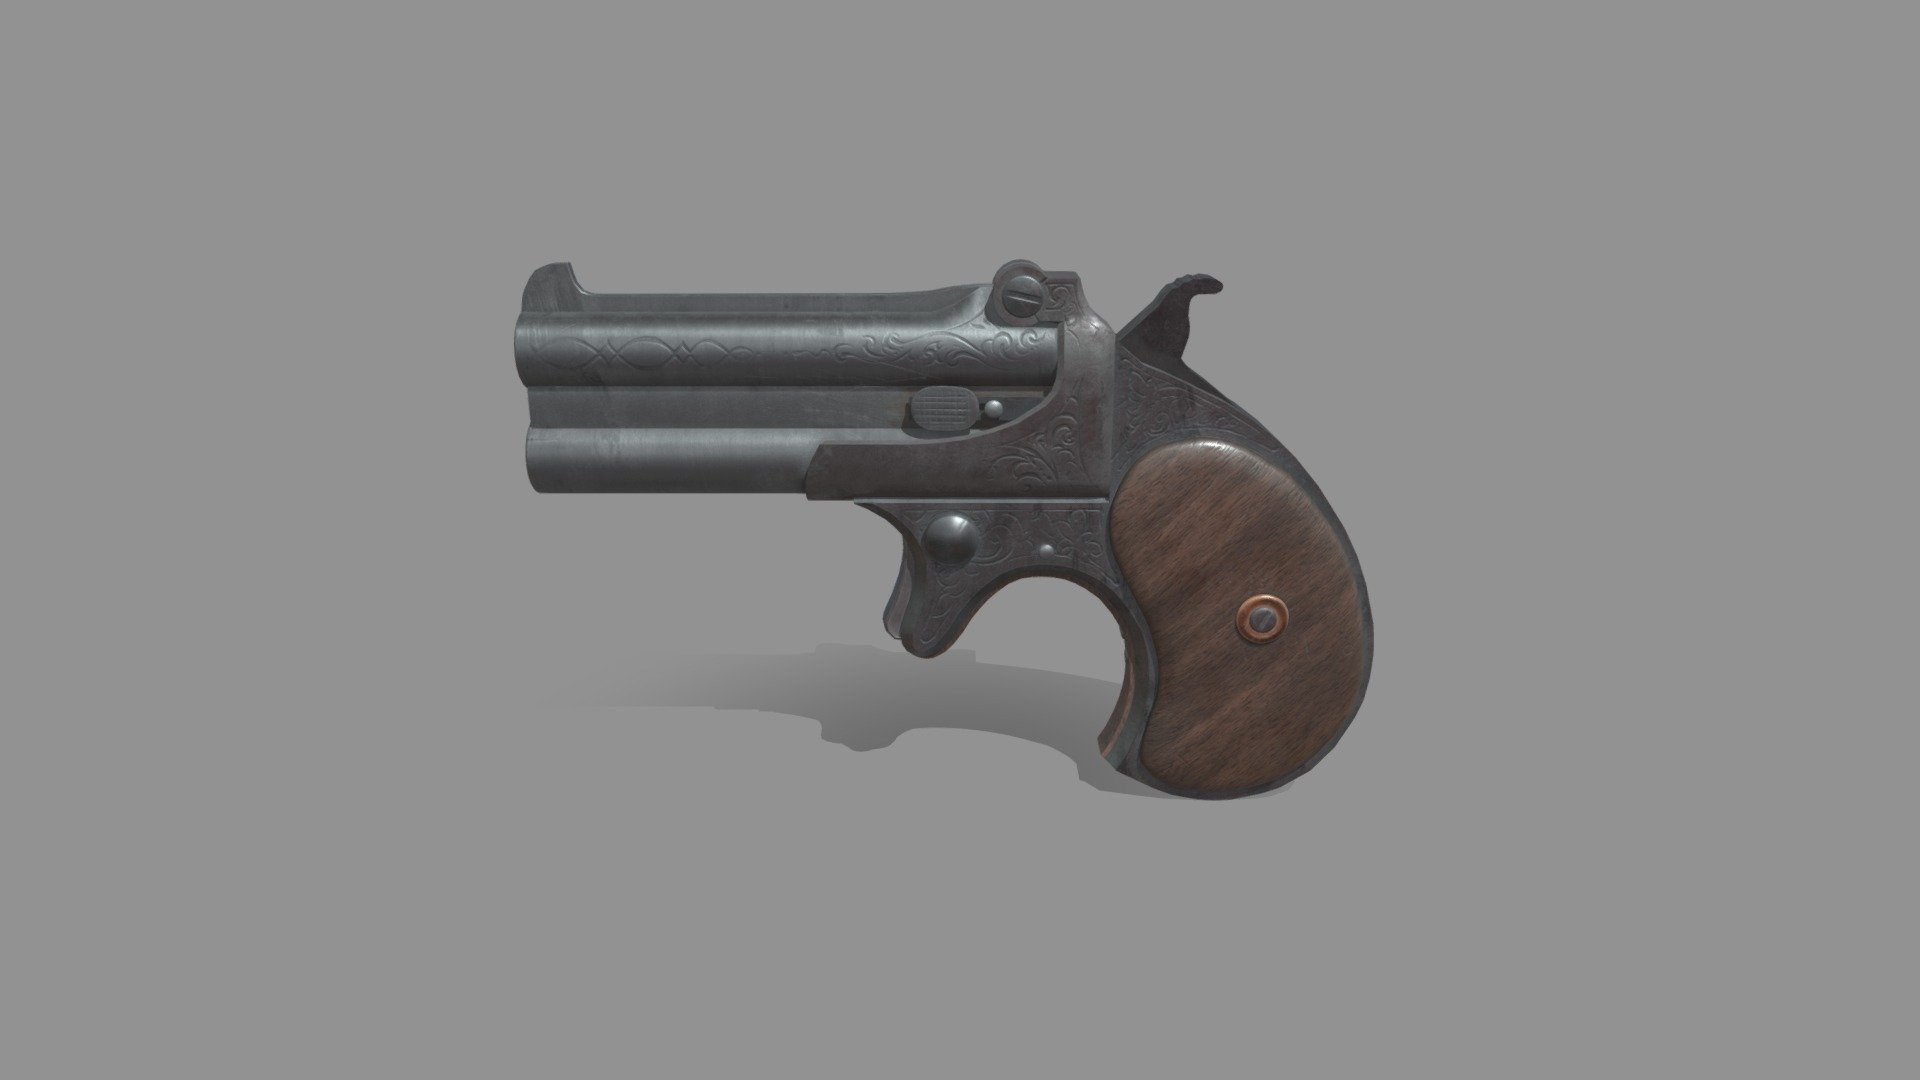 A 3D model of a derringer pistol - a quick and small project to practice complex 3D modelling and texturing.
Made by me.

Note: If you download and use my model, please credit me, especially if used commercially 3d model